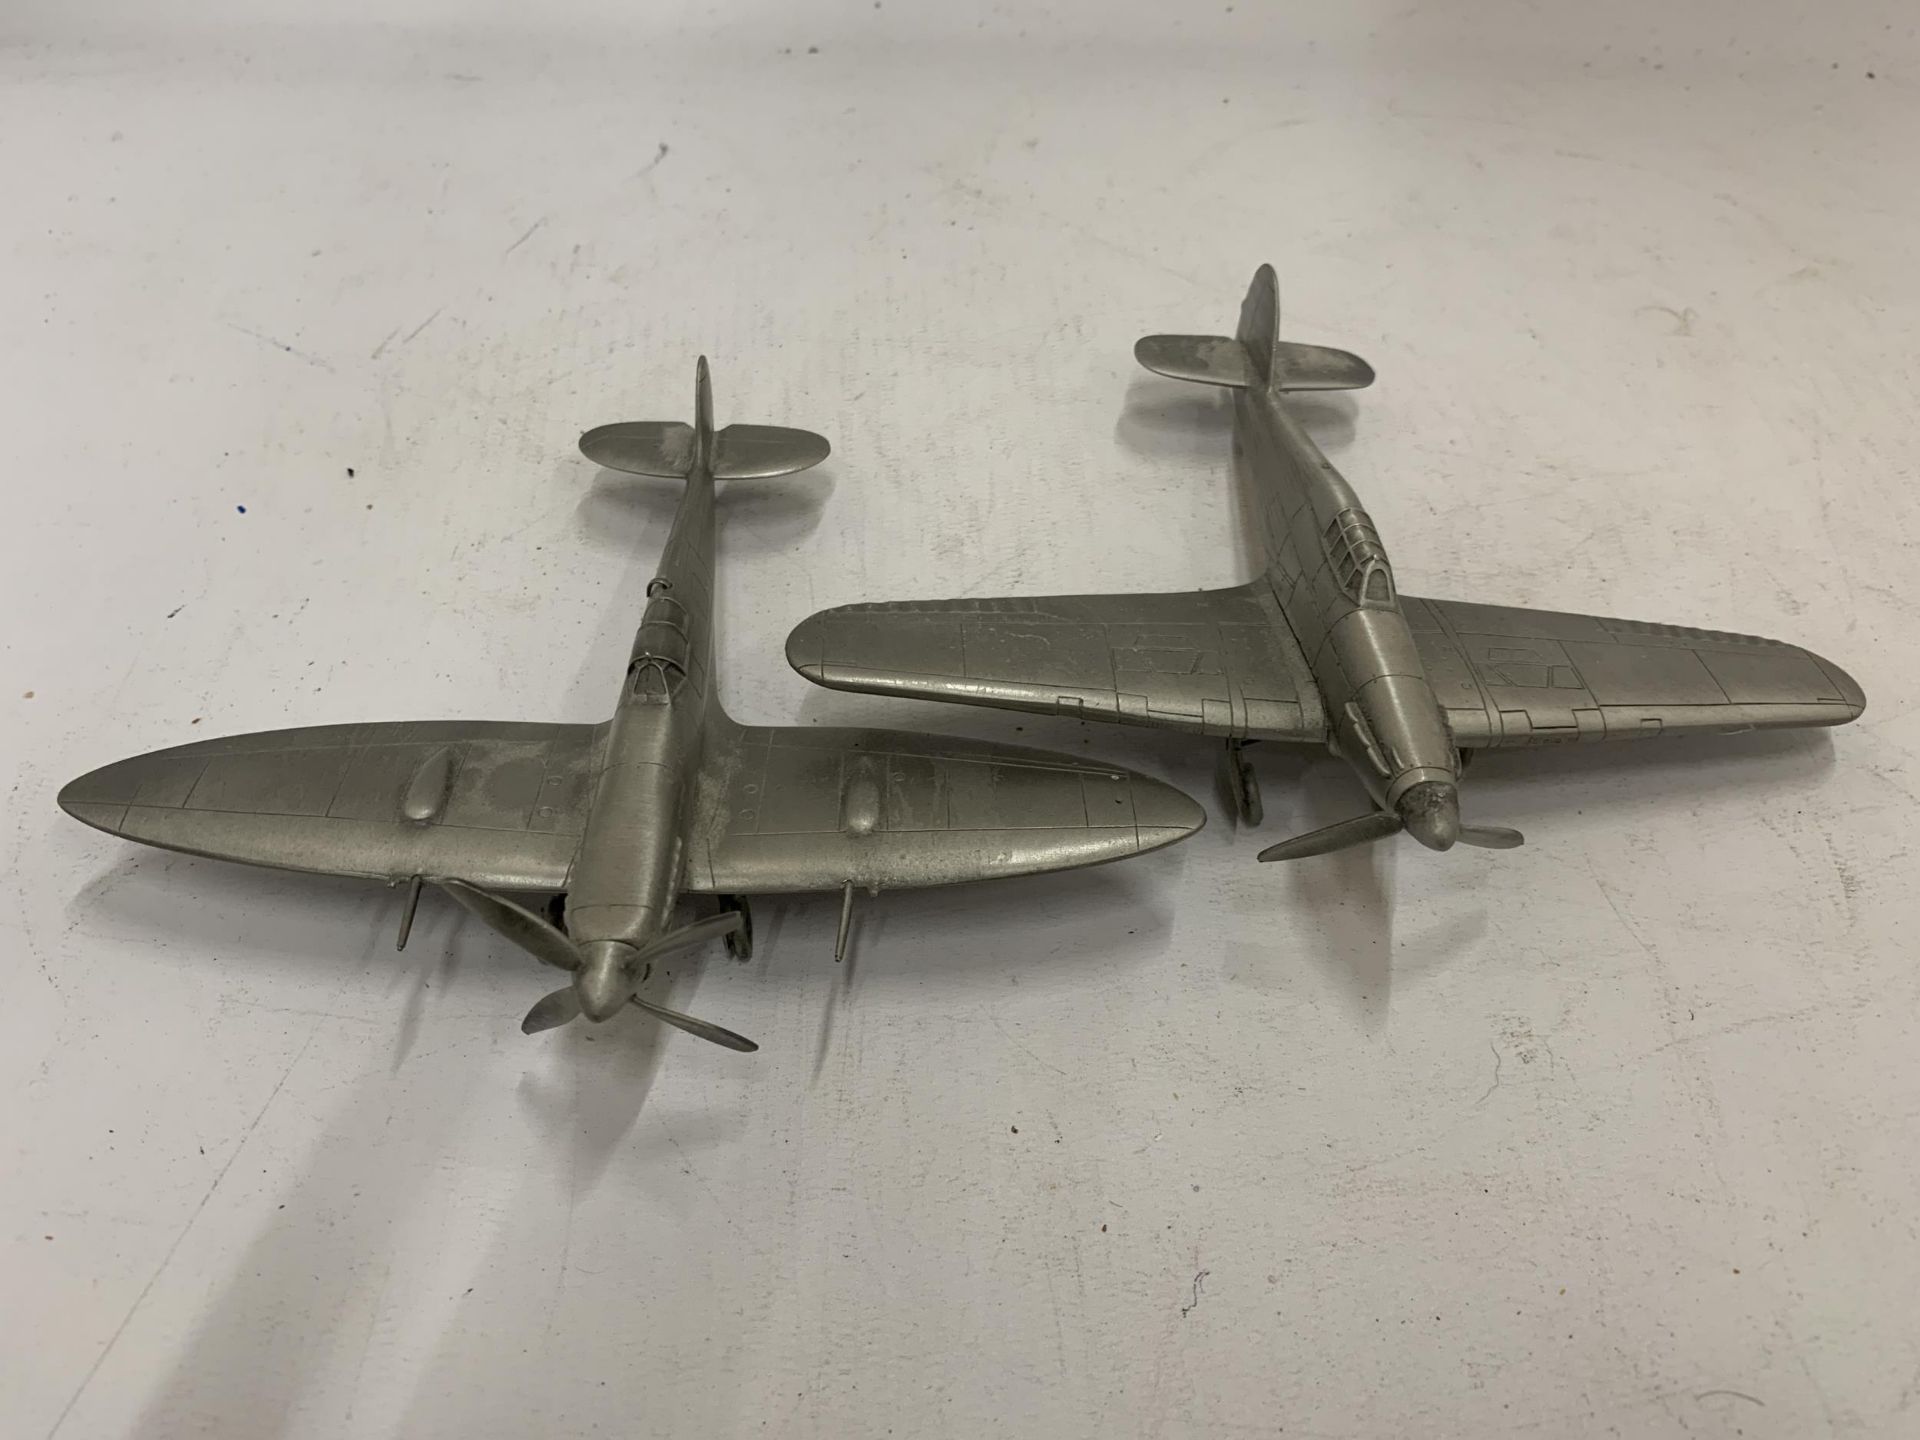 TWO PEWTER WORLD WAR 11 PLANES, A SPITFIRE AND HURRICANE